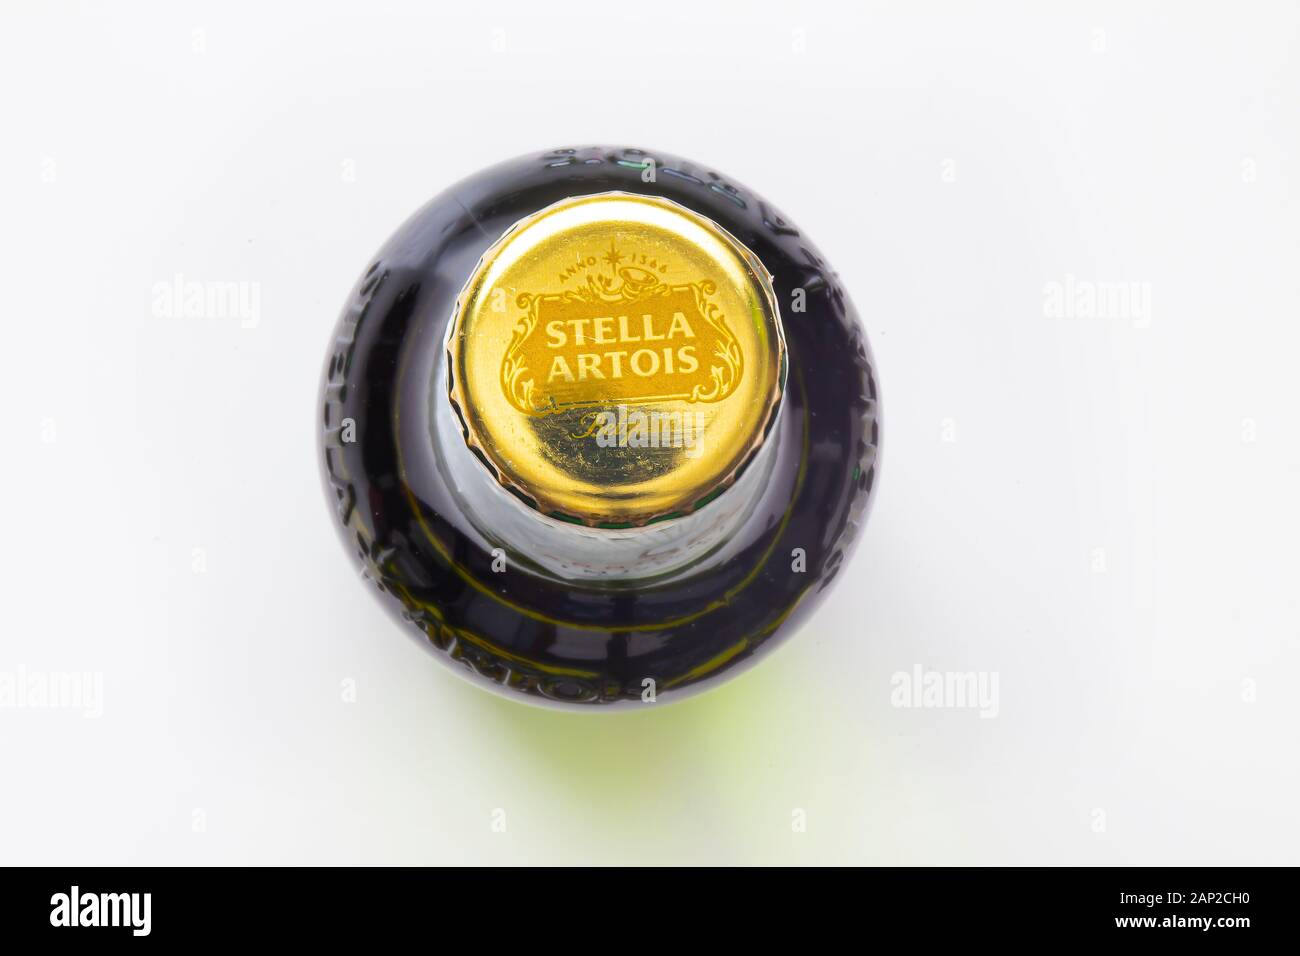 Top view of a Stella Artois beer bottle on a white background Stock Photo